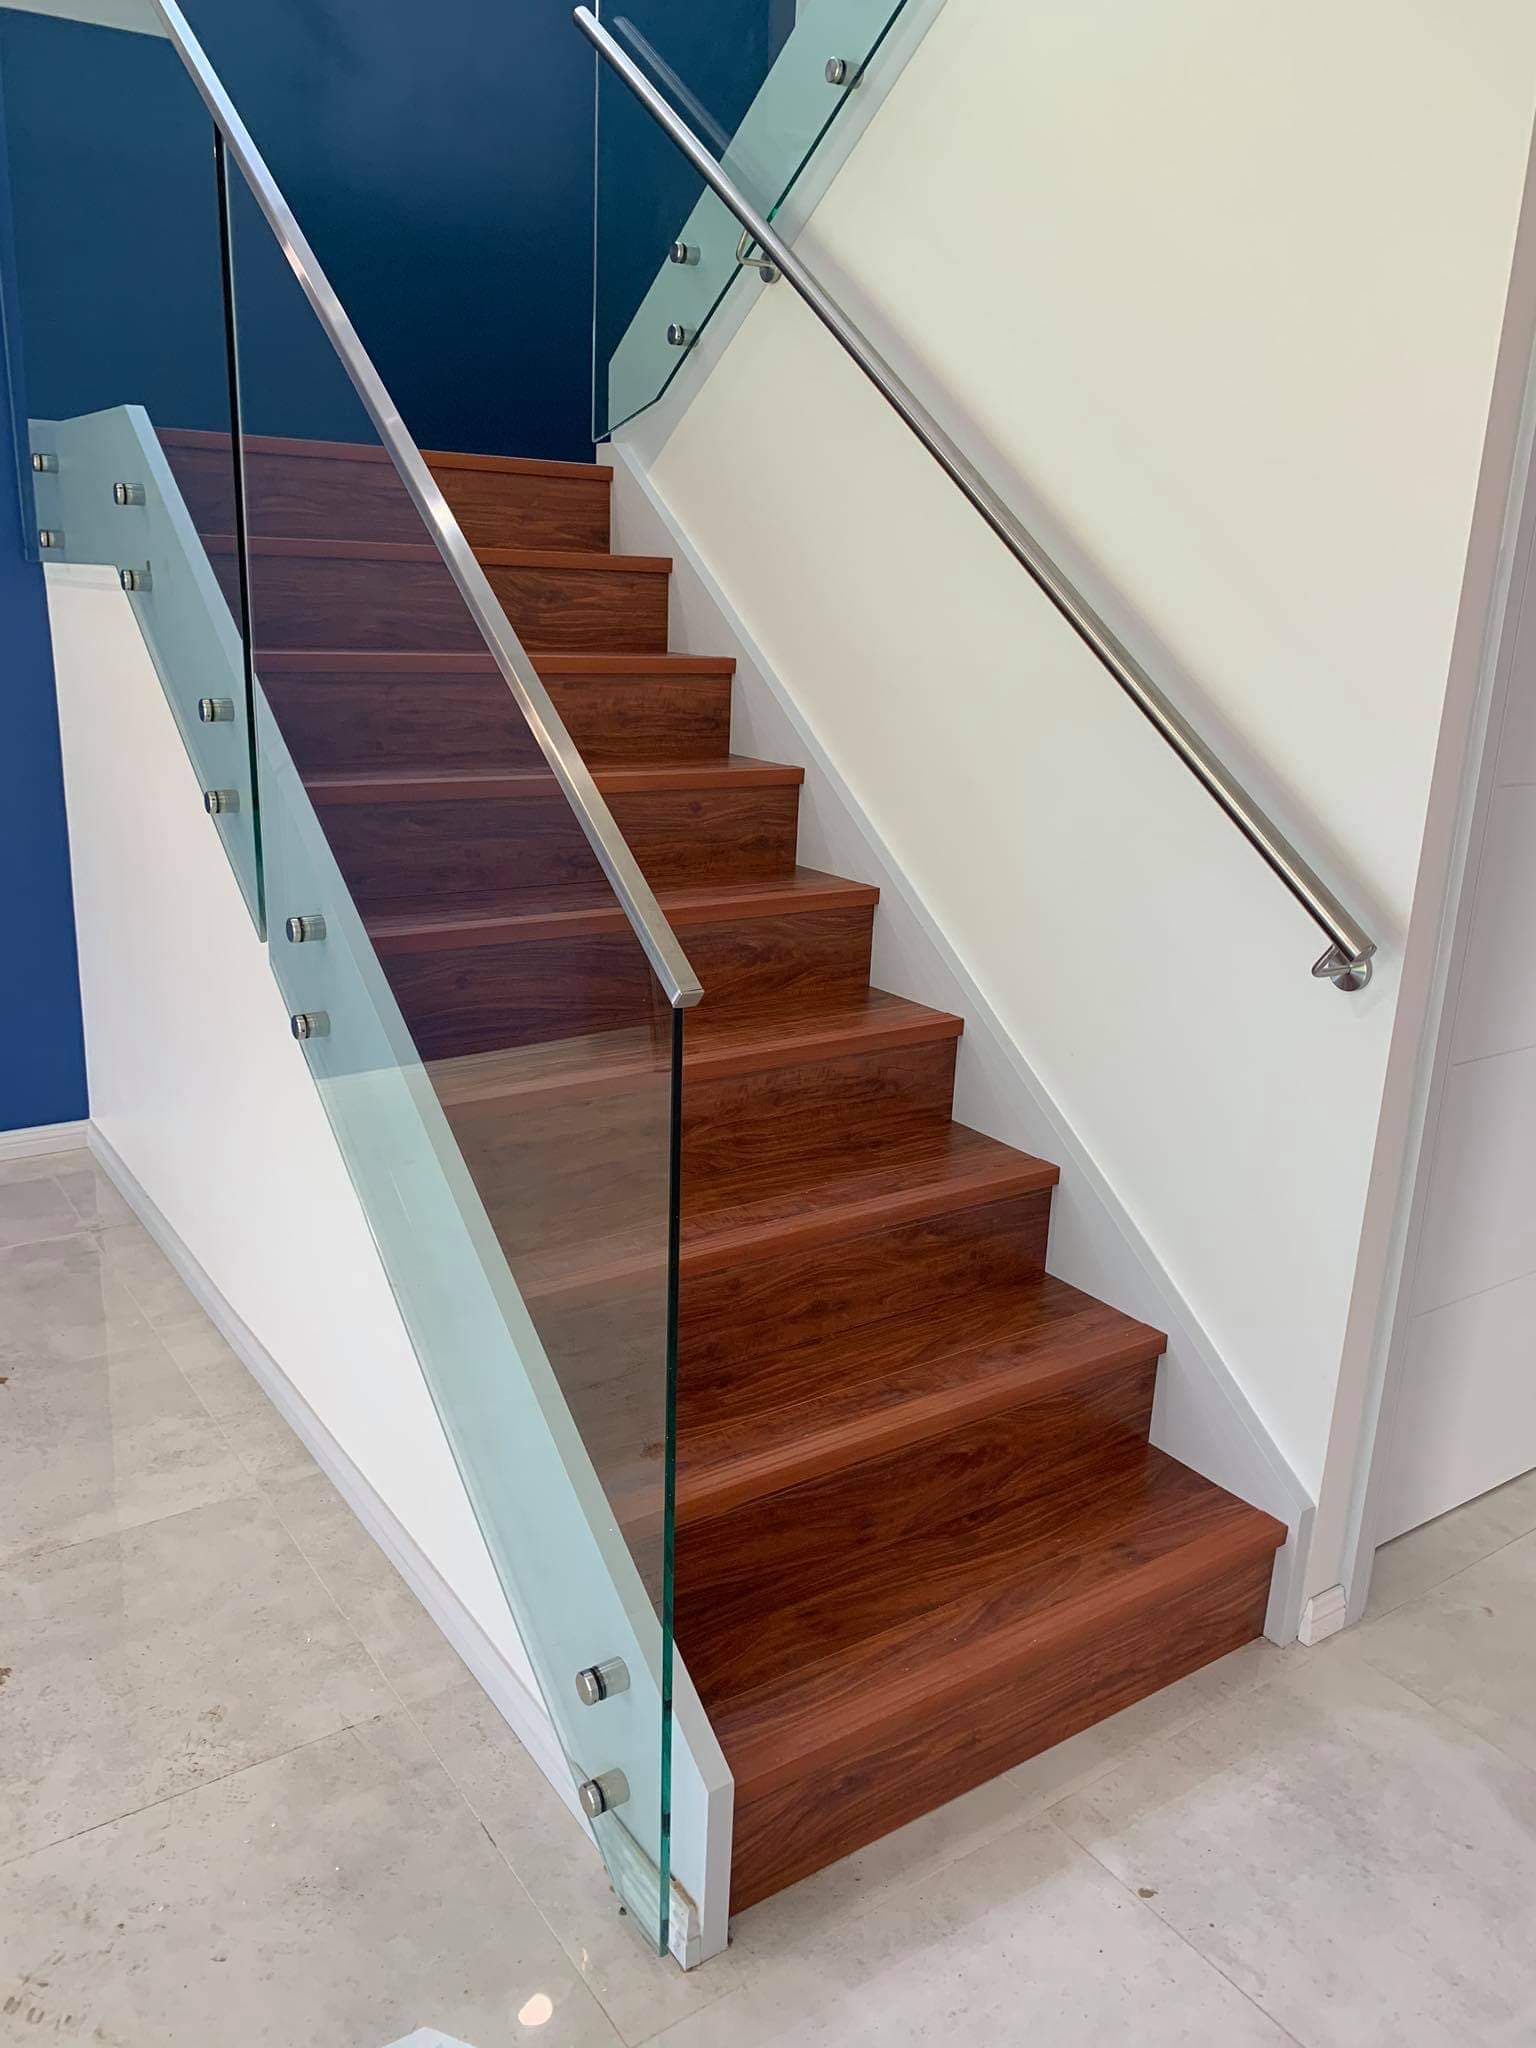 Straight stair with glass holder